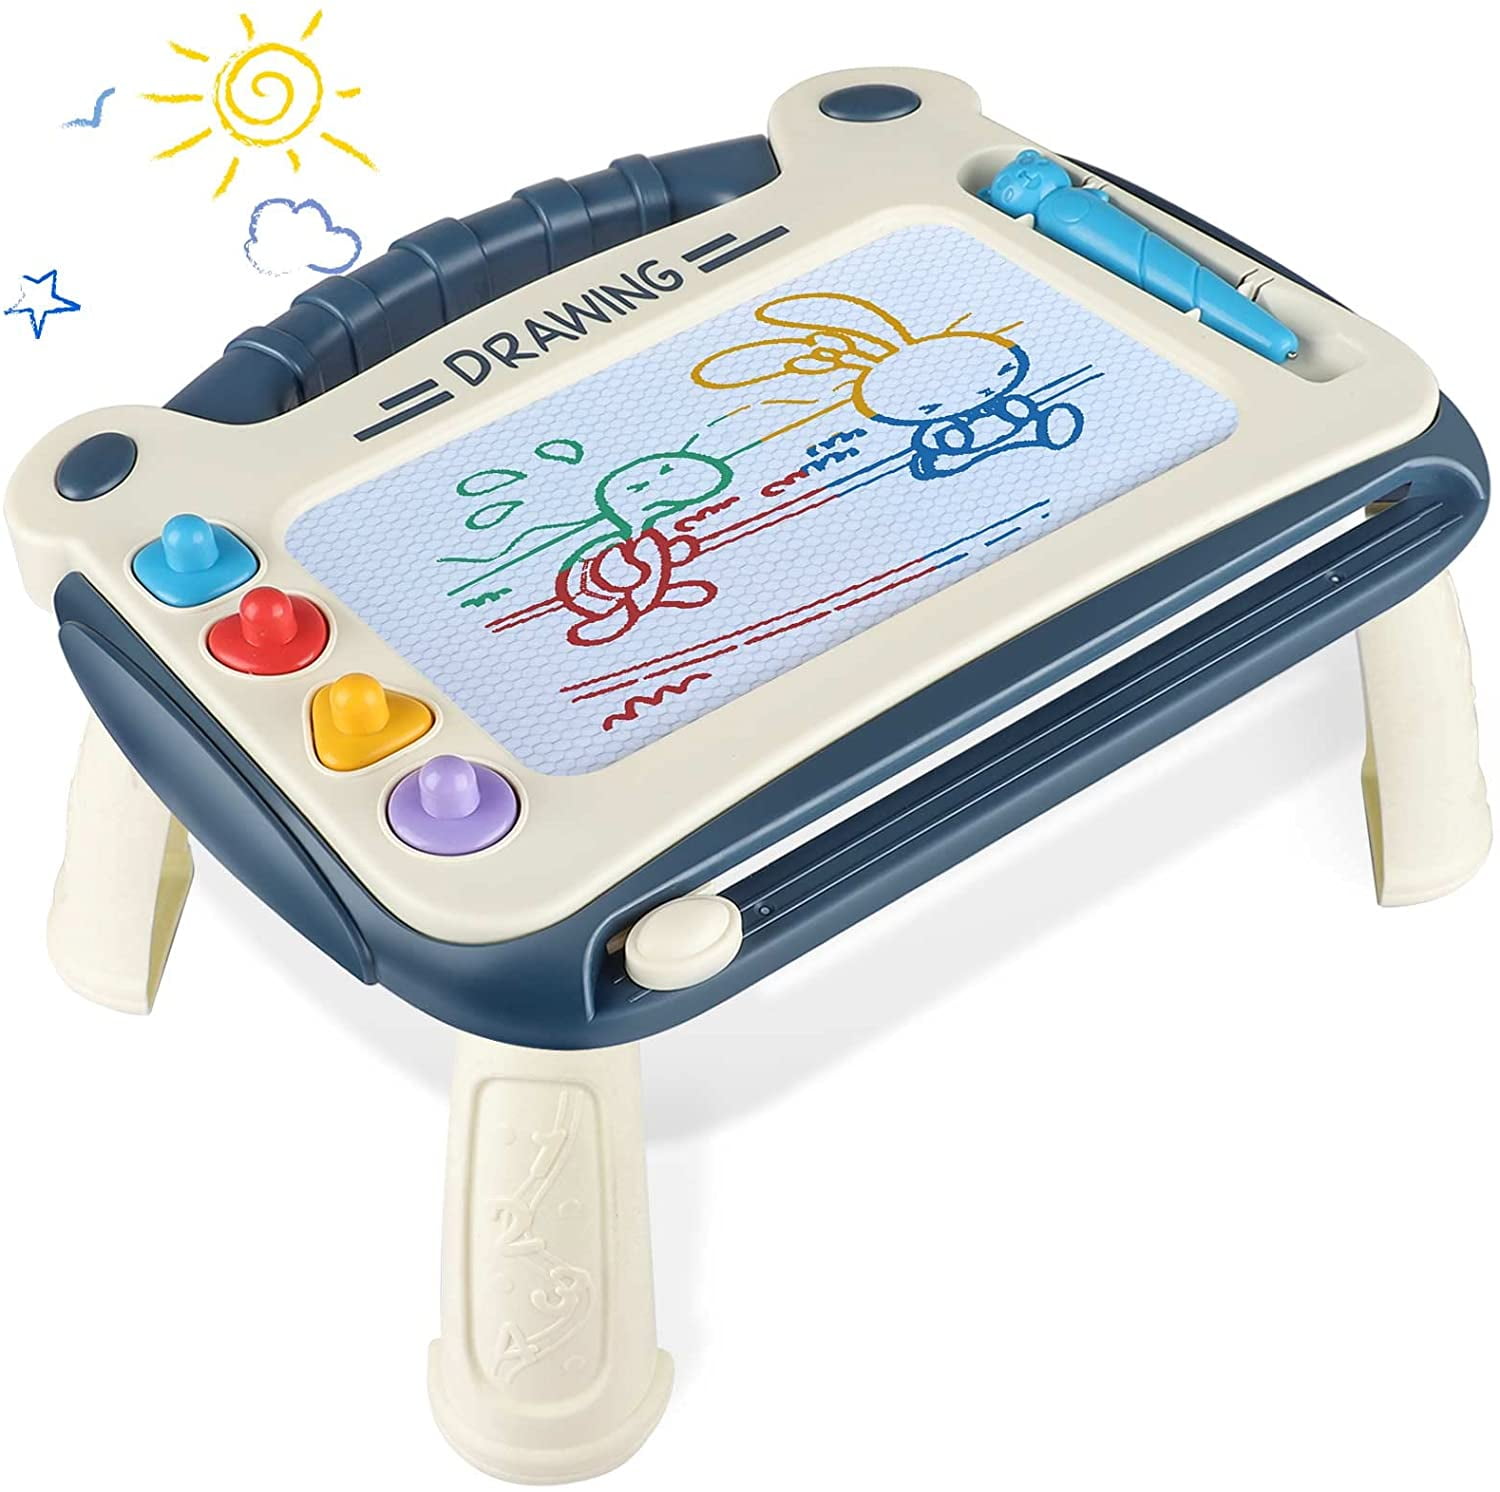 This Drawing Pad Belongs to: Large Drawing Pad for Kids /Childrens